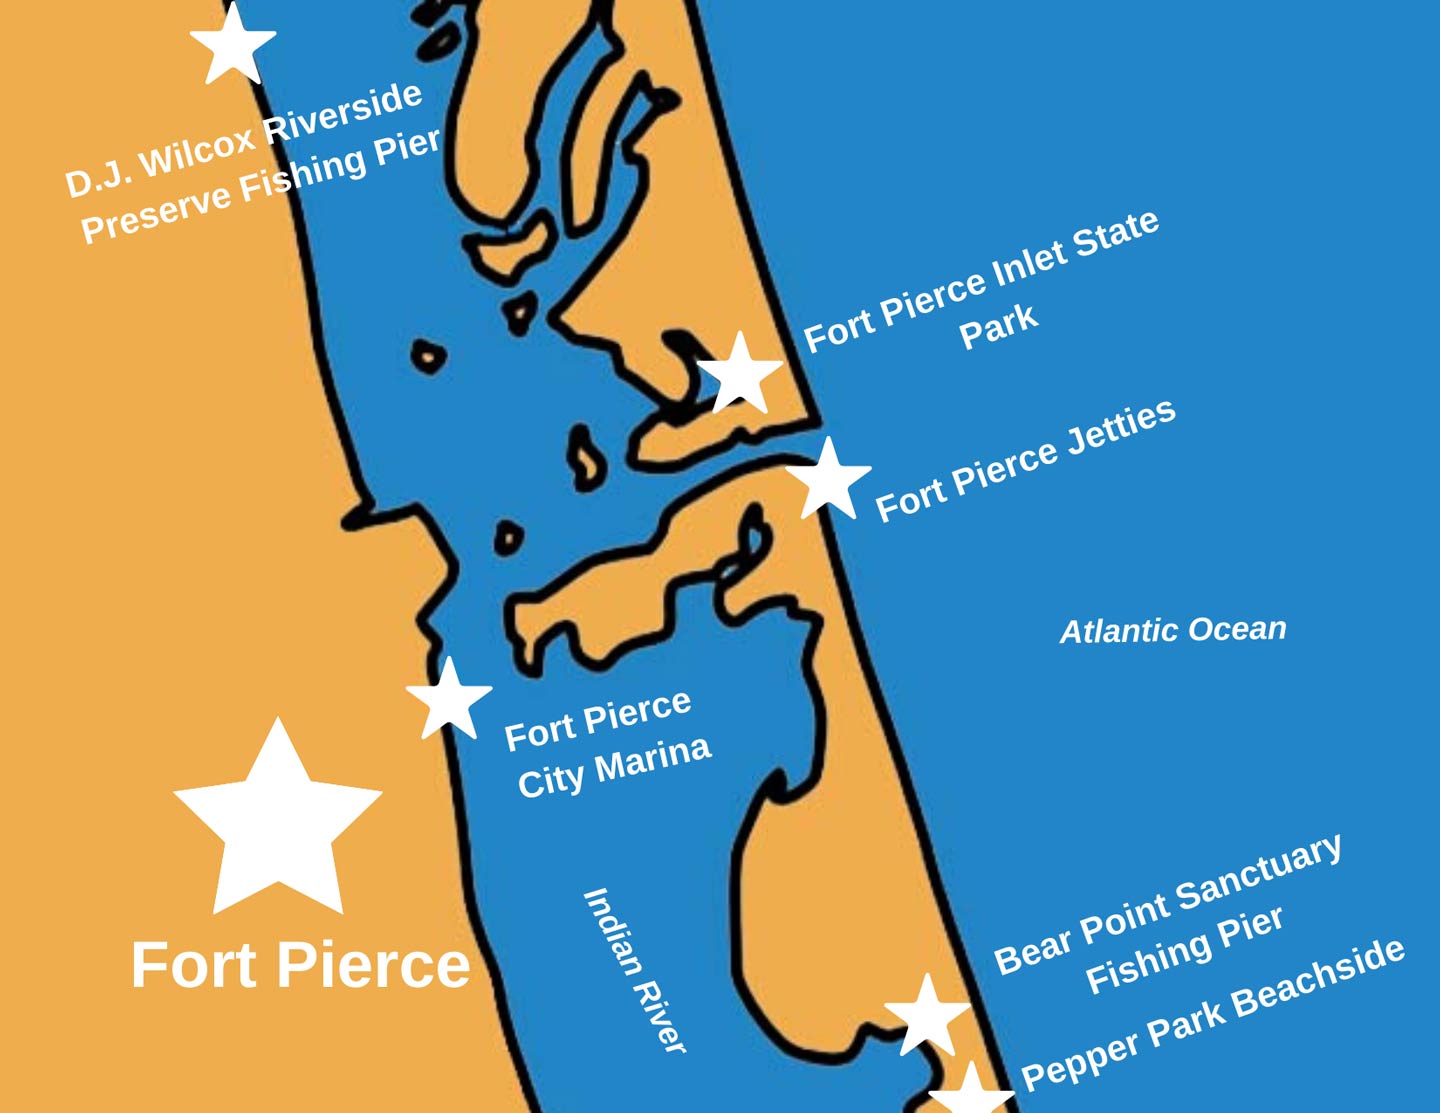 An infographic showing the top fishing spots in Fort Pierce, including Fort Pierce City Marina, the jetties, and Pepper Park Beachside